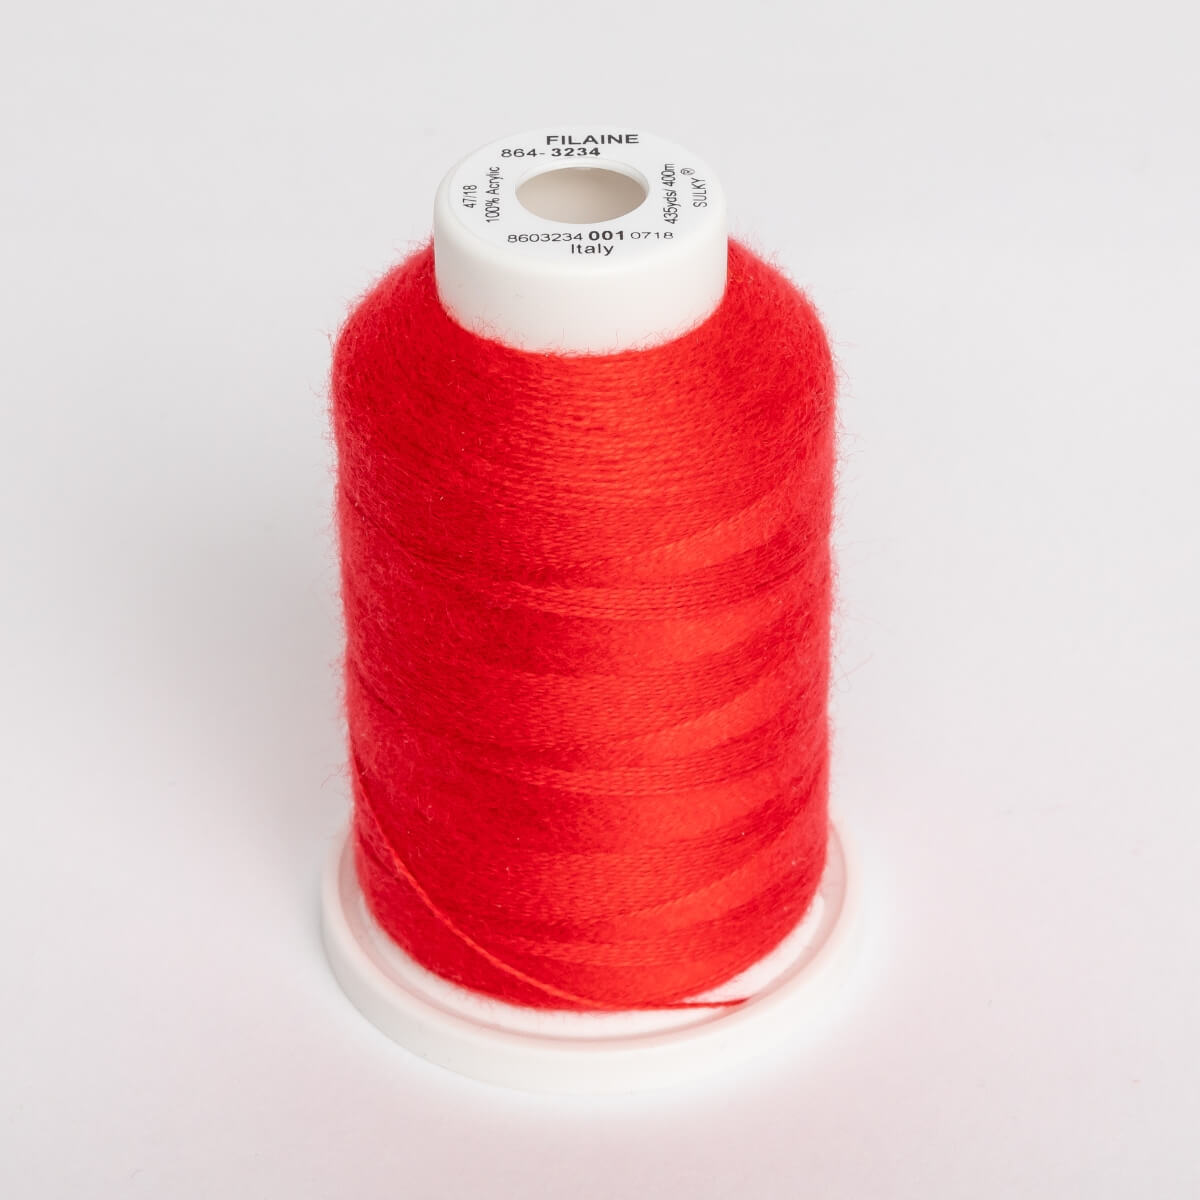 SULKY FILAINE 12, 400m/435yds Maxi Spools - Colour 3234 Lt. Red